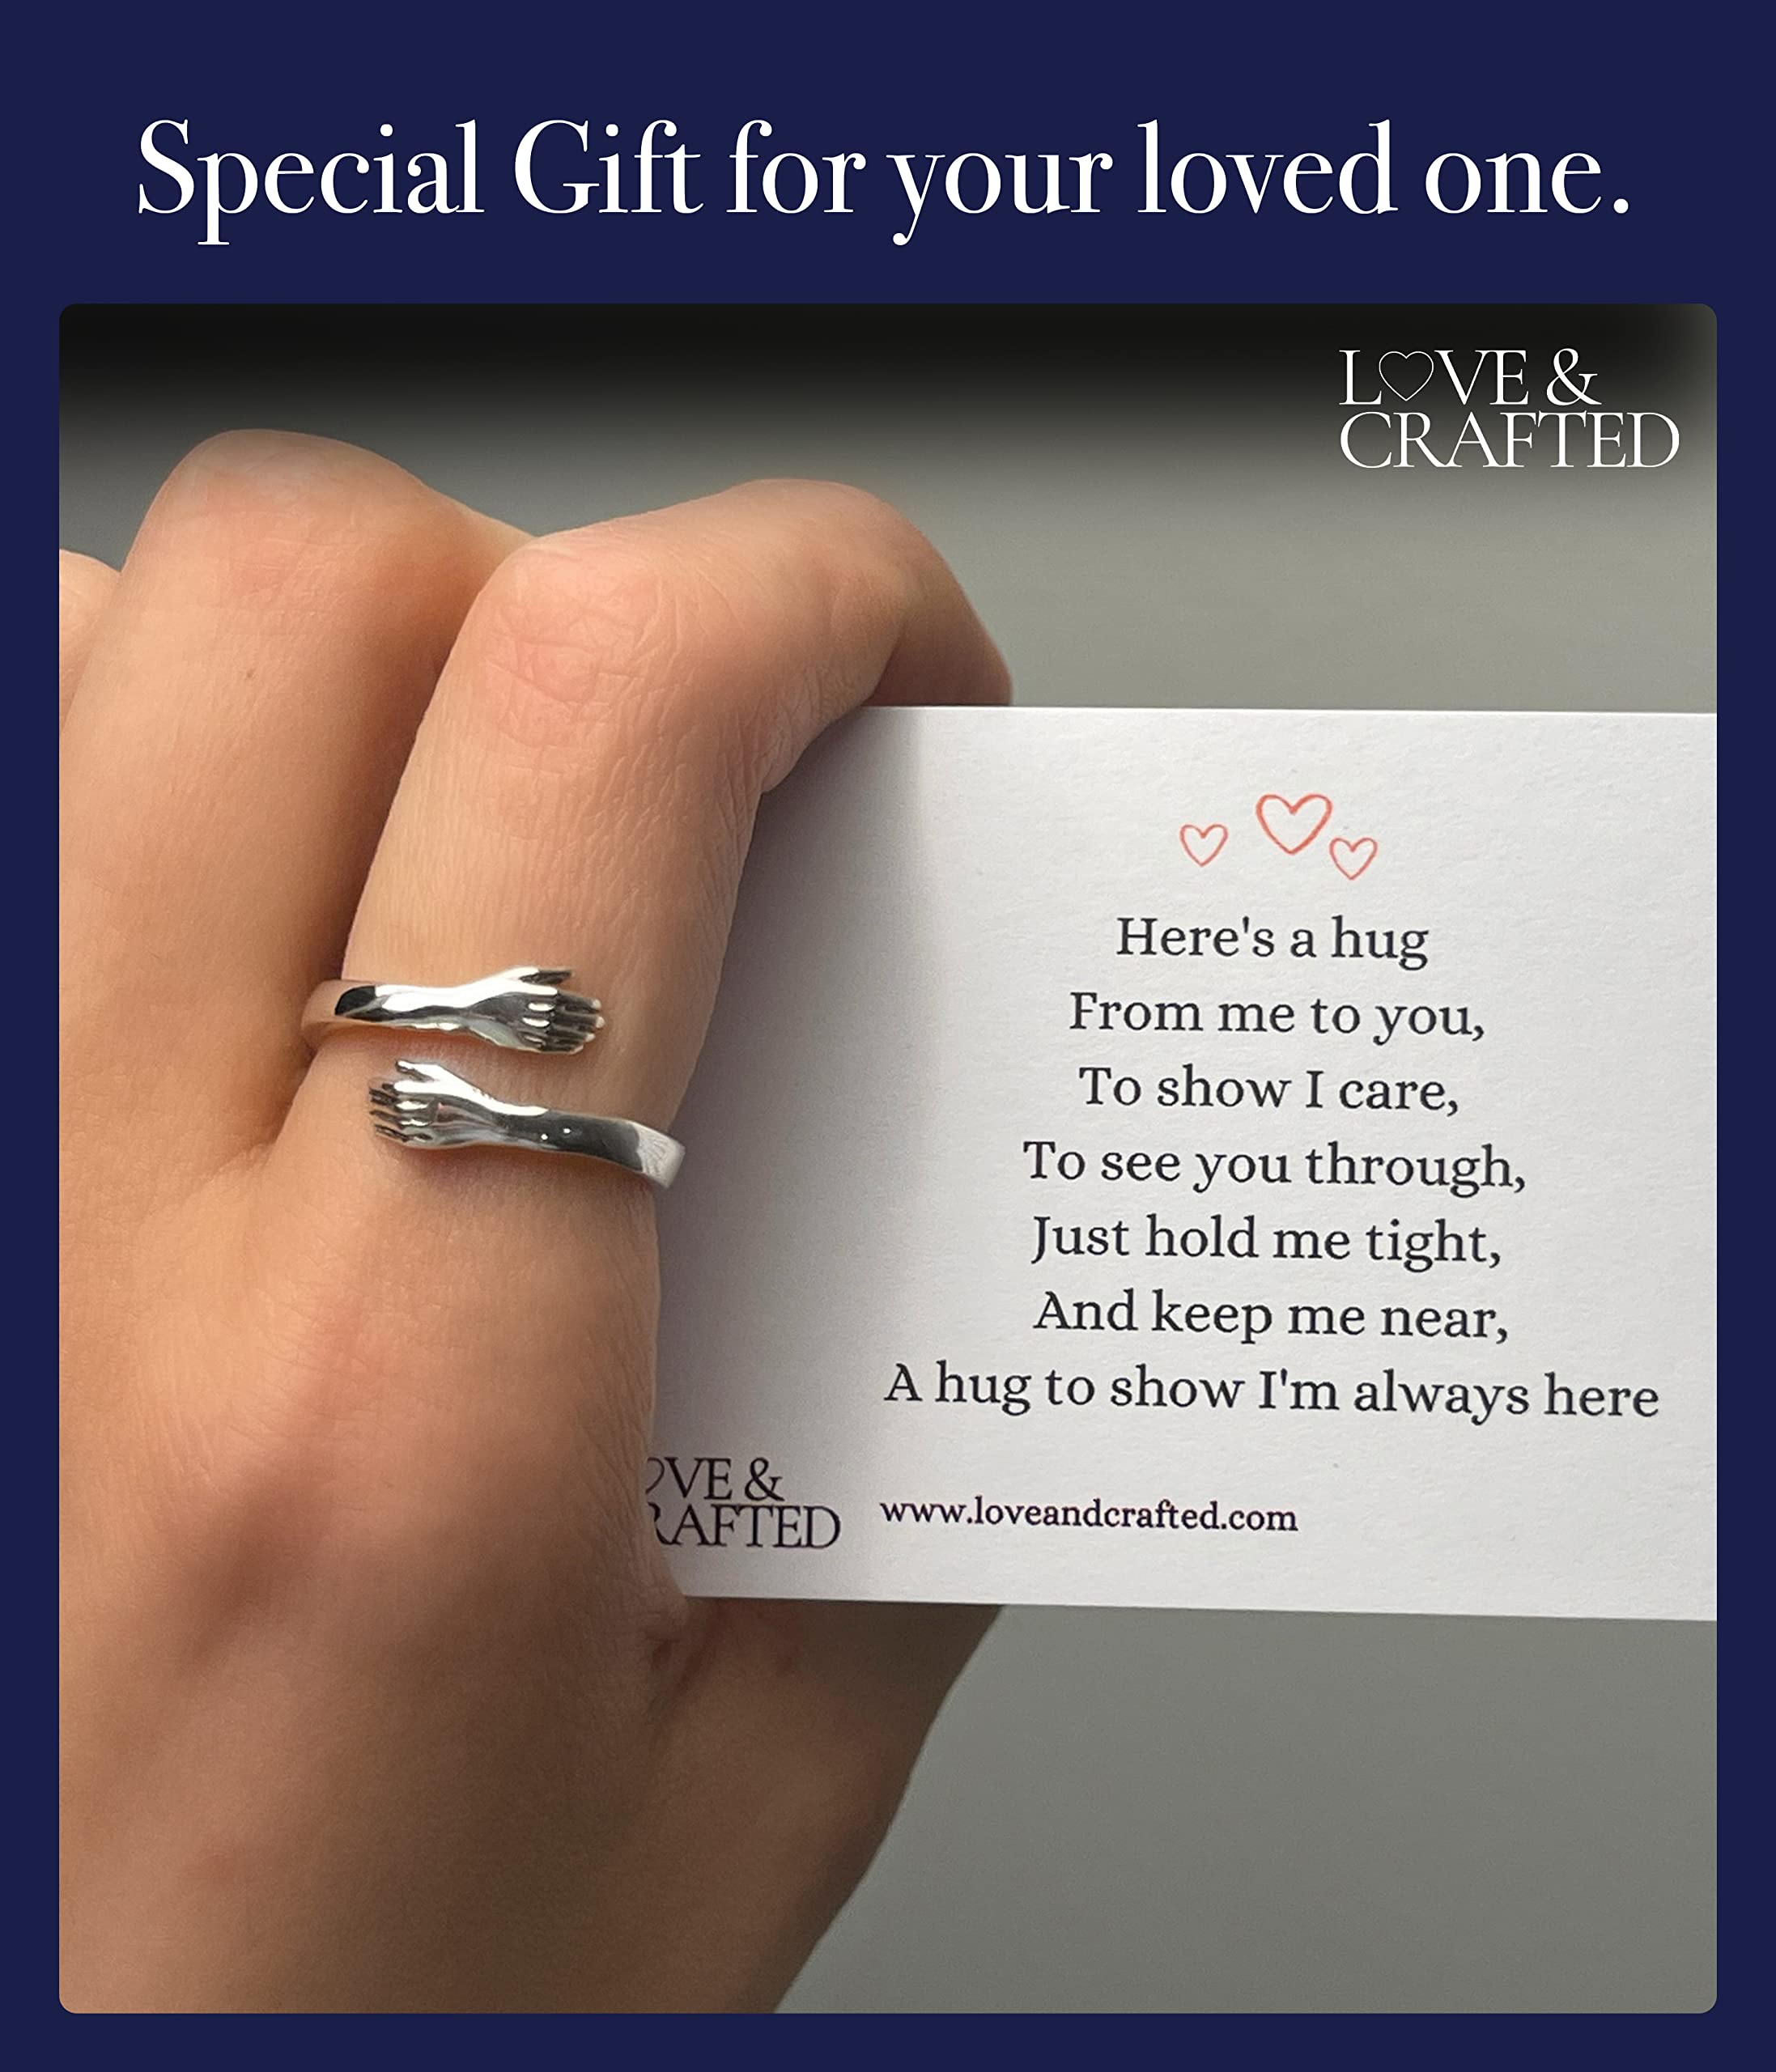 Love & Crafted Hug Ring 925 Sterling Silver adjustable - Mother Daughter Rings - Hug Ring for Granddaughter - Teen Promise Ring - Daughter Gift from Mom - Friendship Rings - Hand Ring - Love Rings